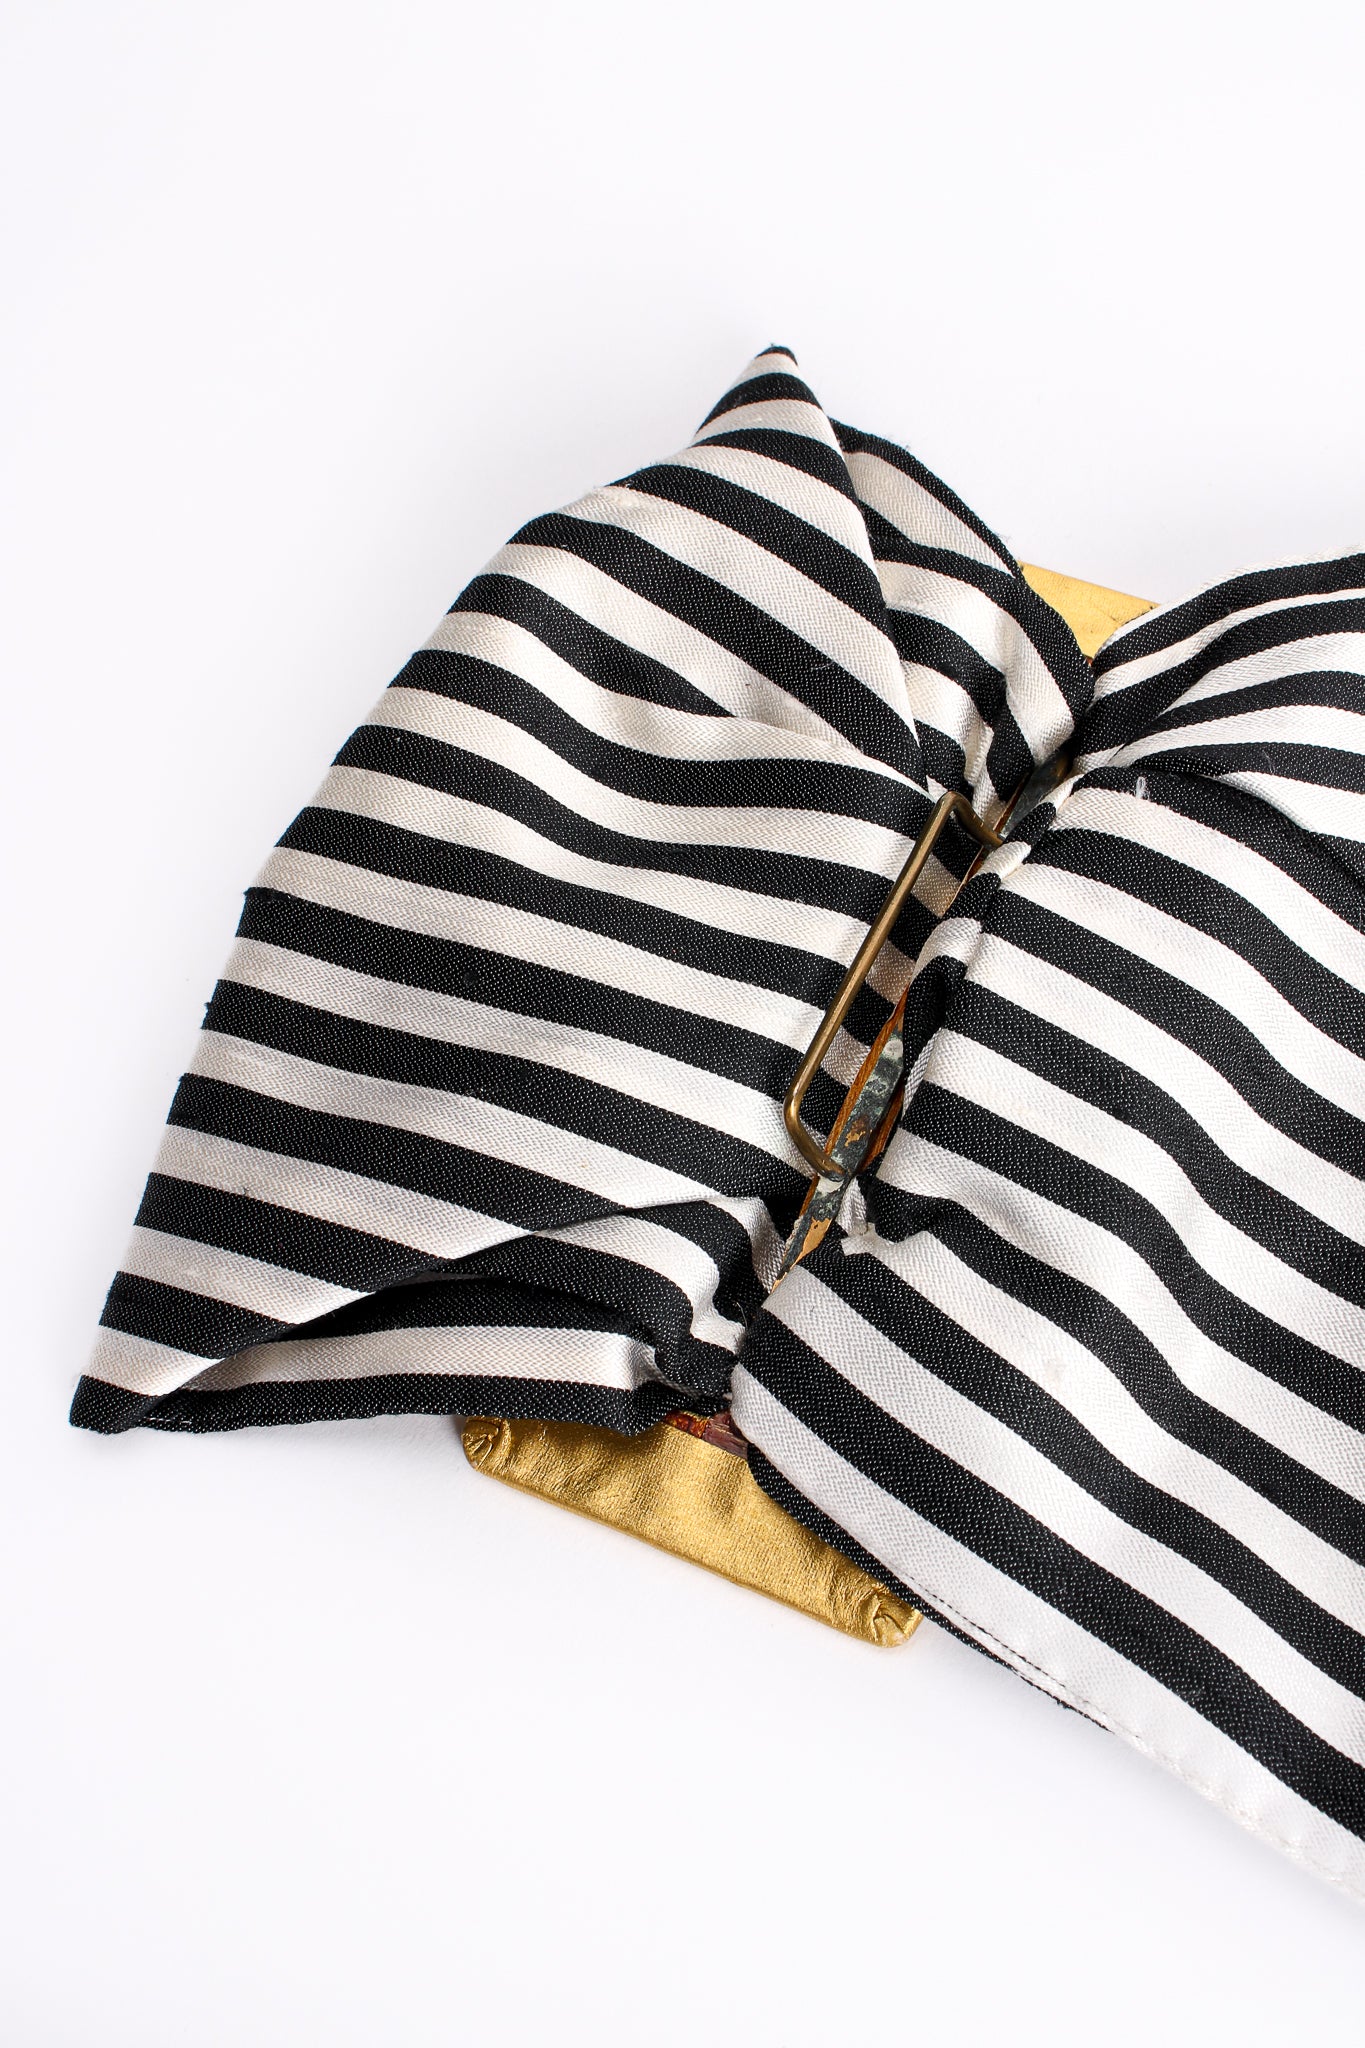 Vintage Paloma Picasso Striped Silk Bow Belt buckle at Recess Los Angeles